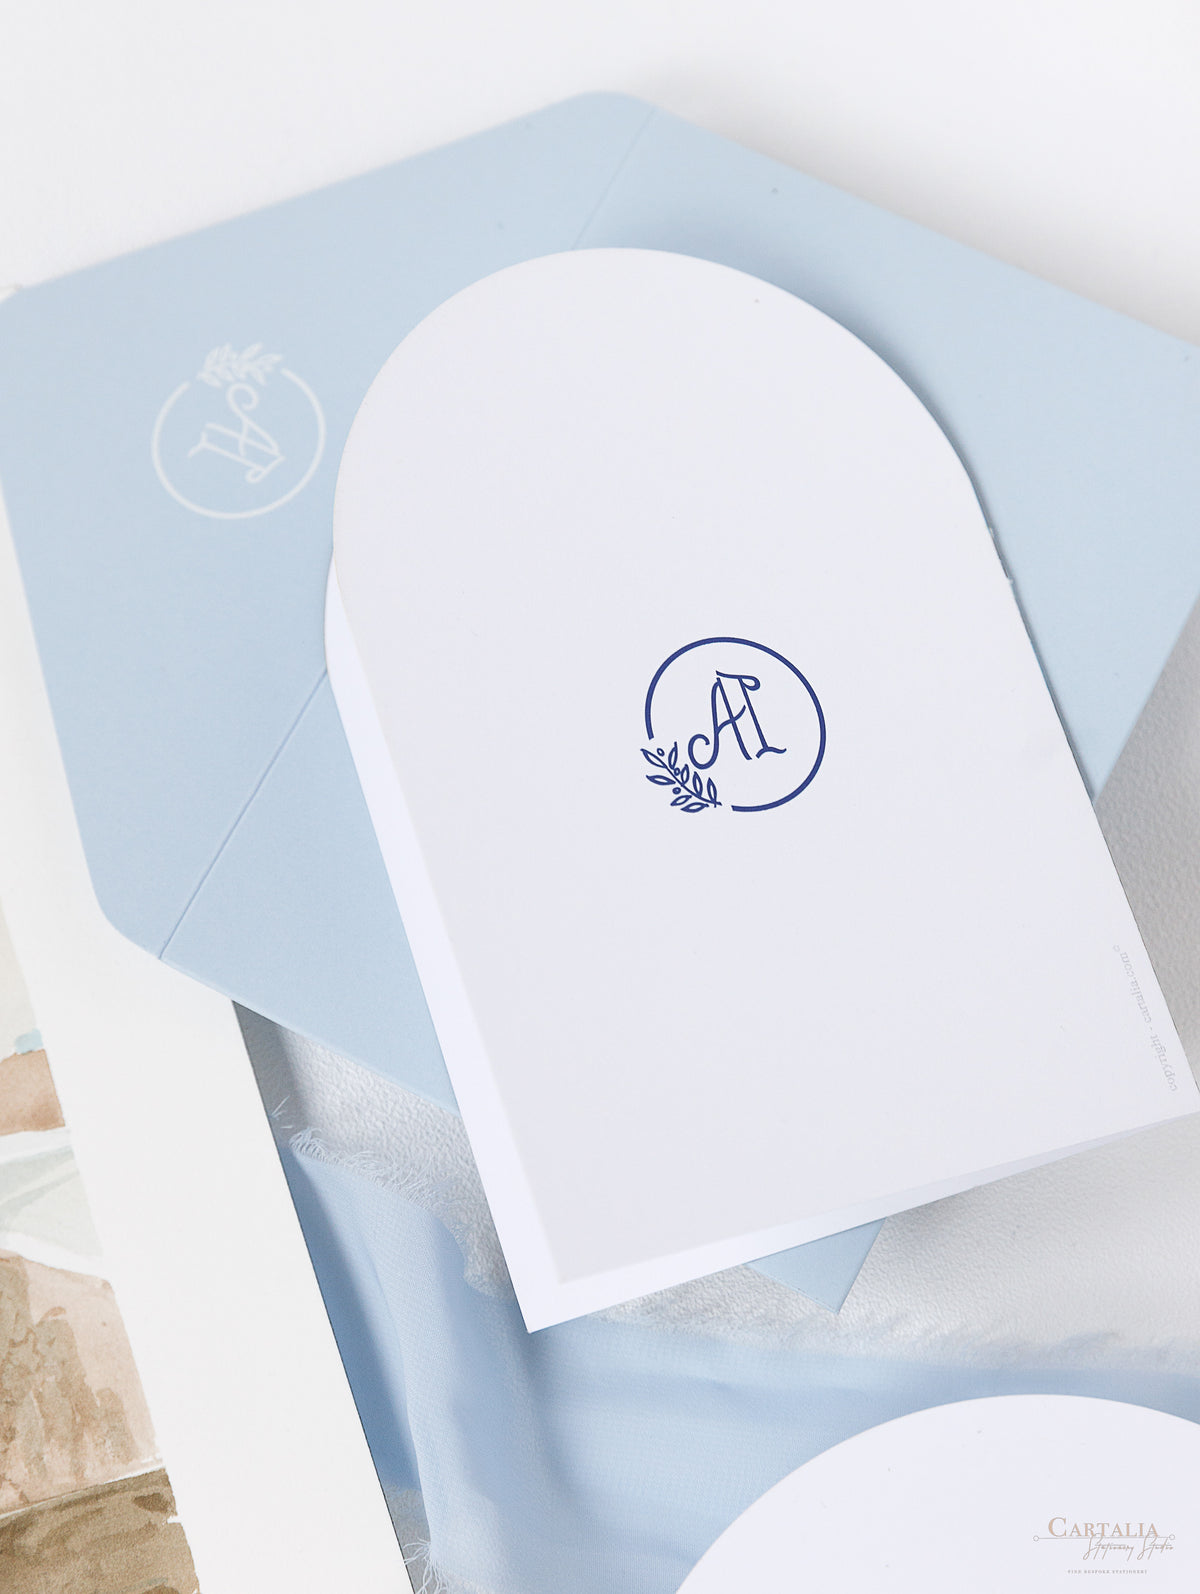 Lieu: Greece Wedding Arch Style Deluxe Stationery | Commission sur mesure A&I